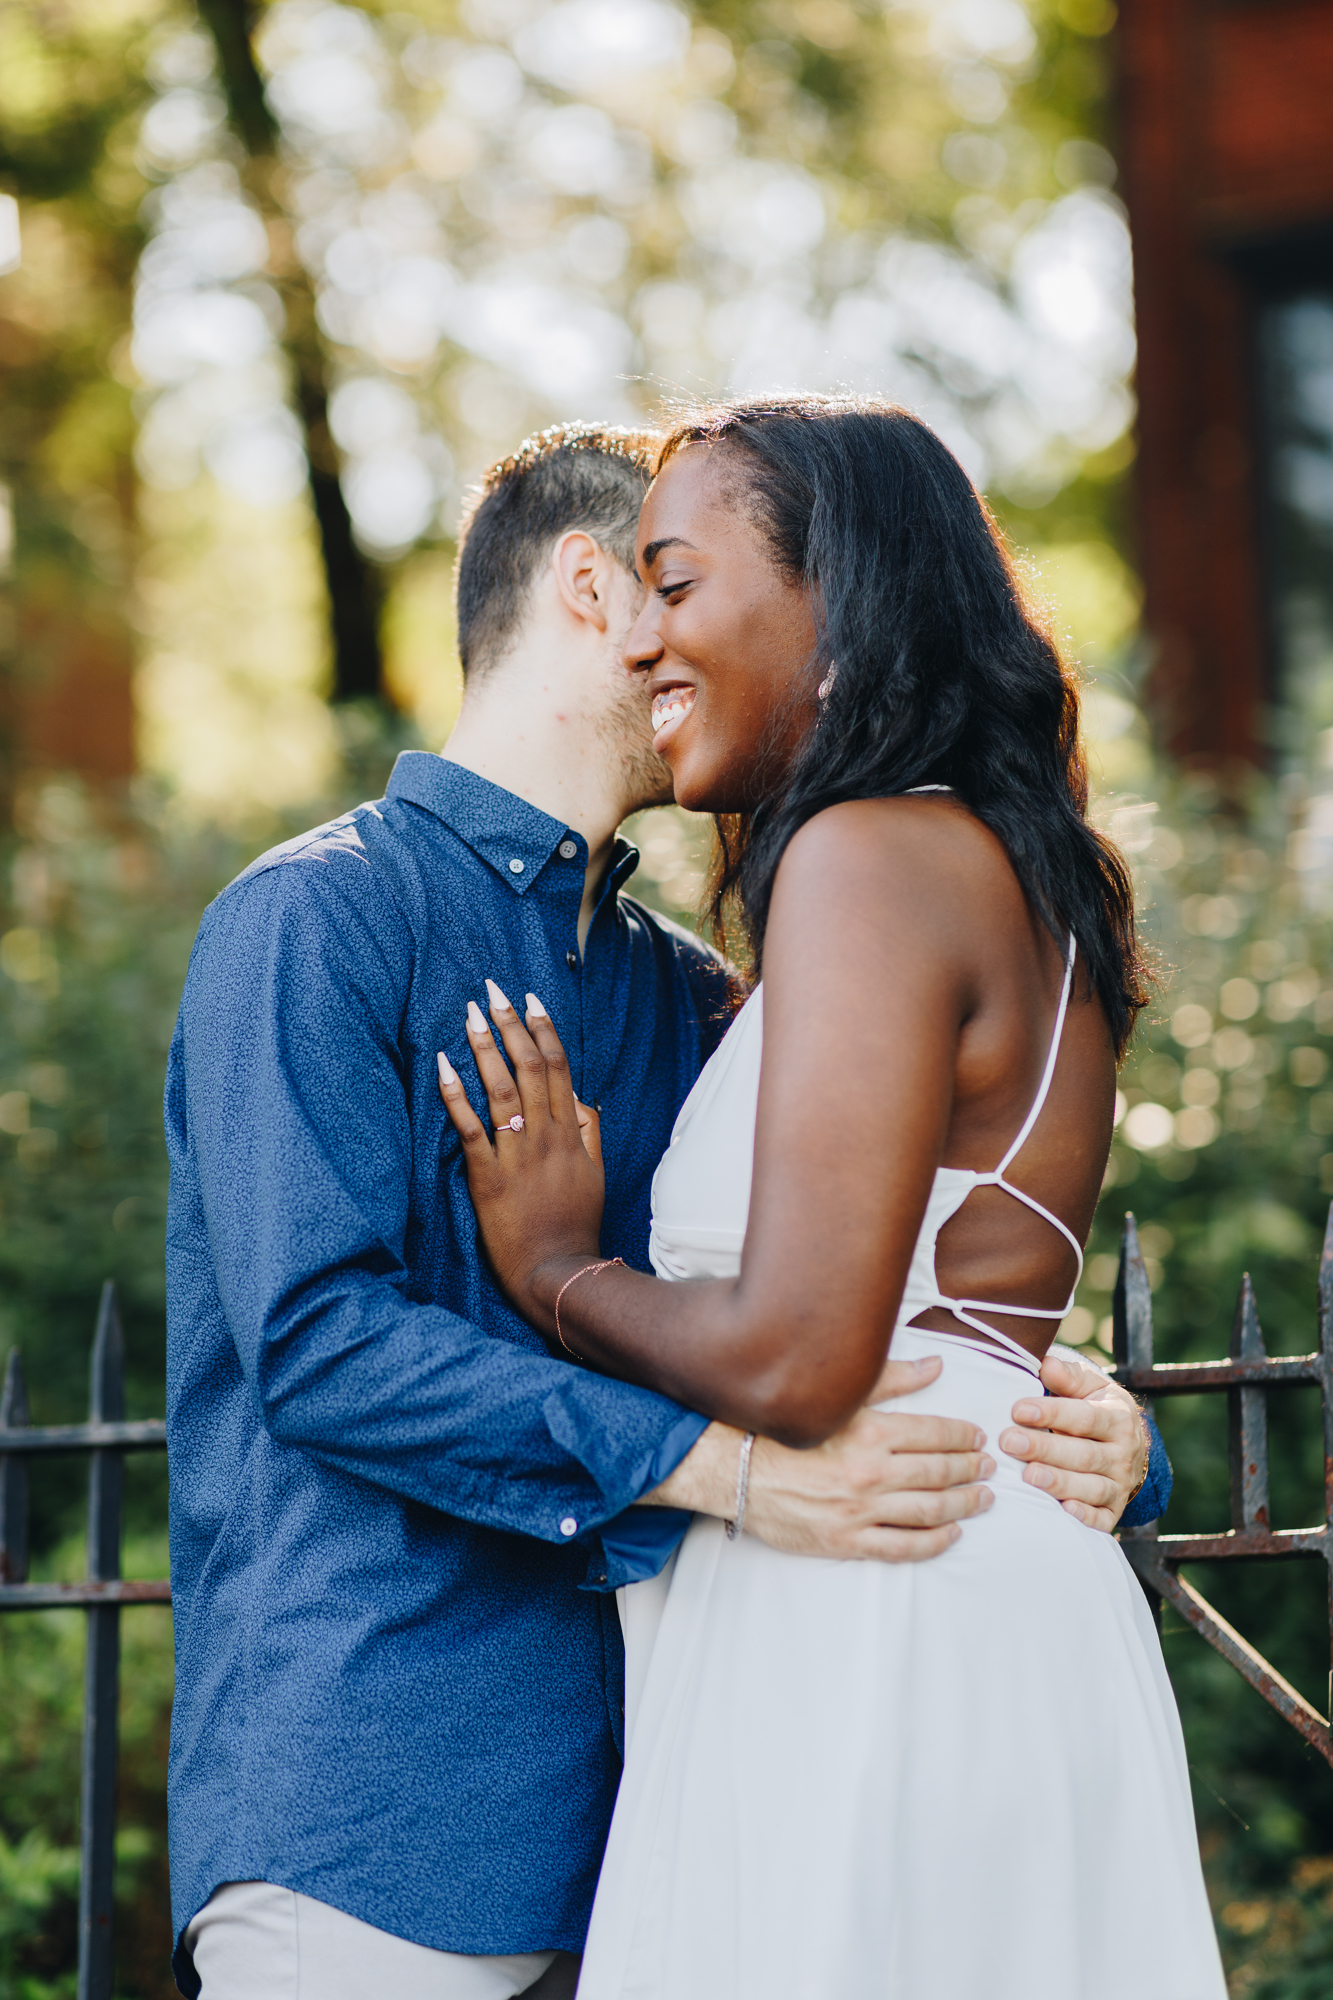 Dreamy Brooklyn Heights Summer Engagement Photography